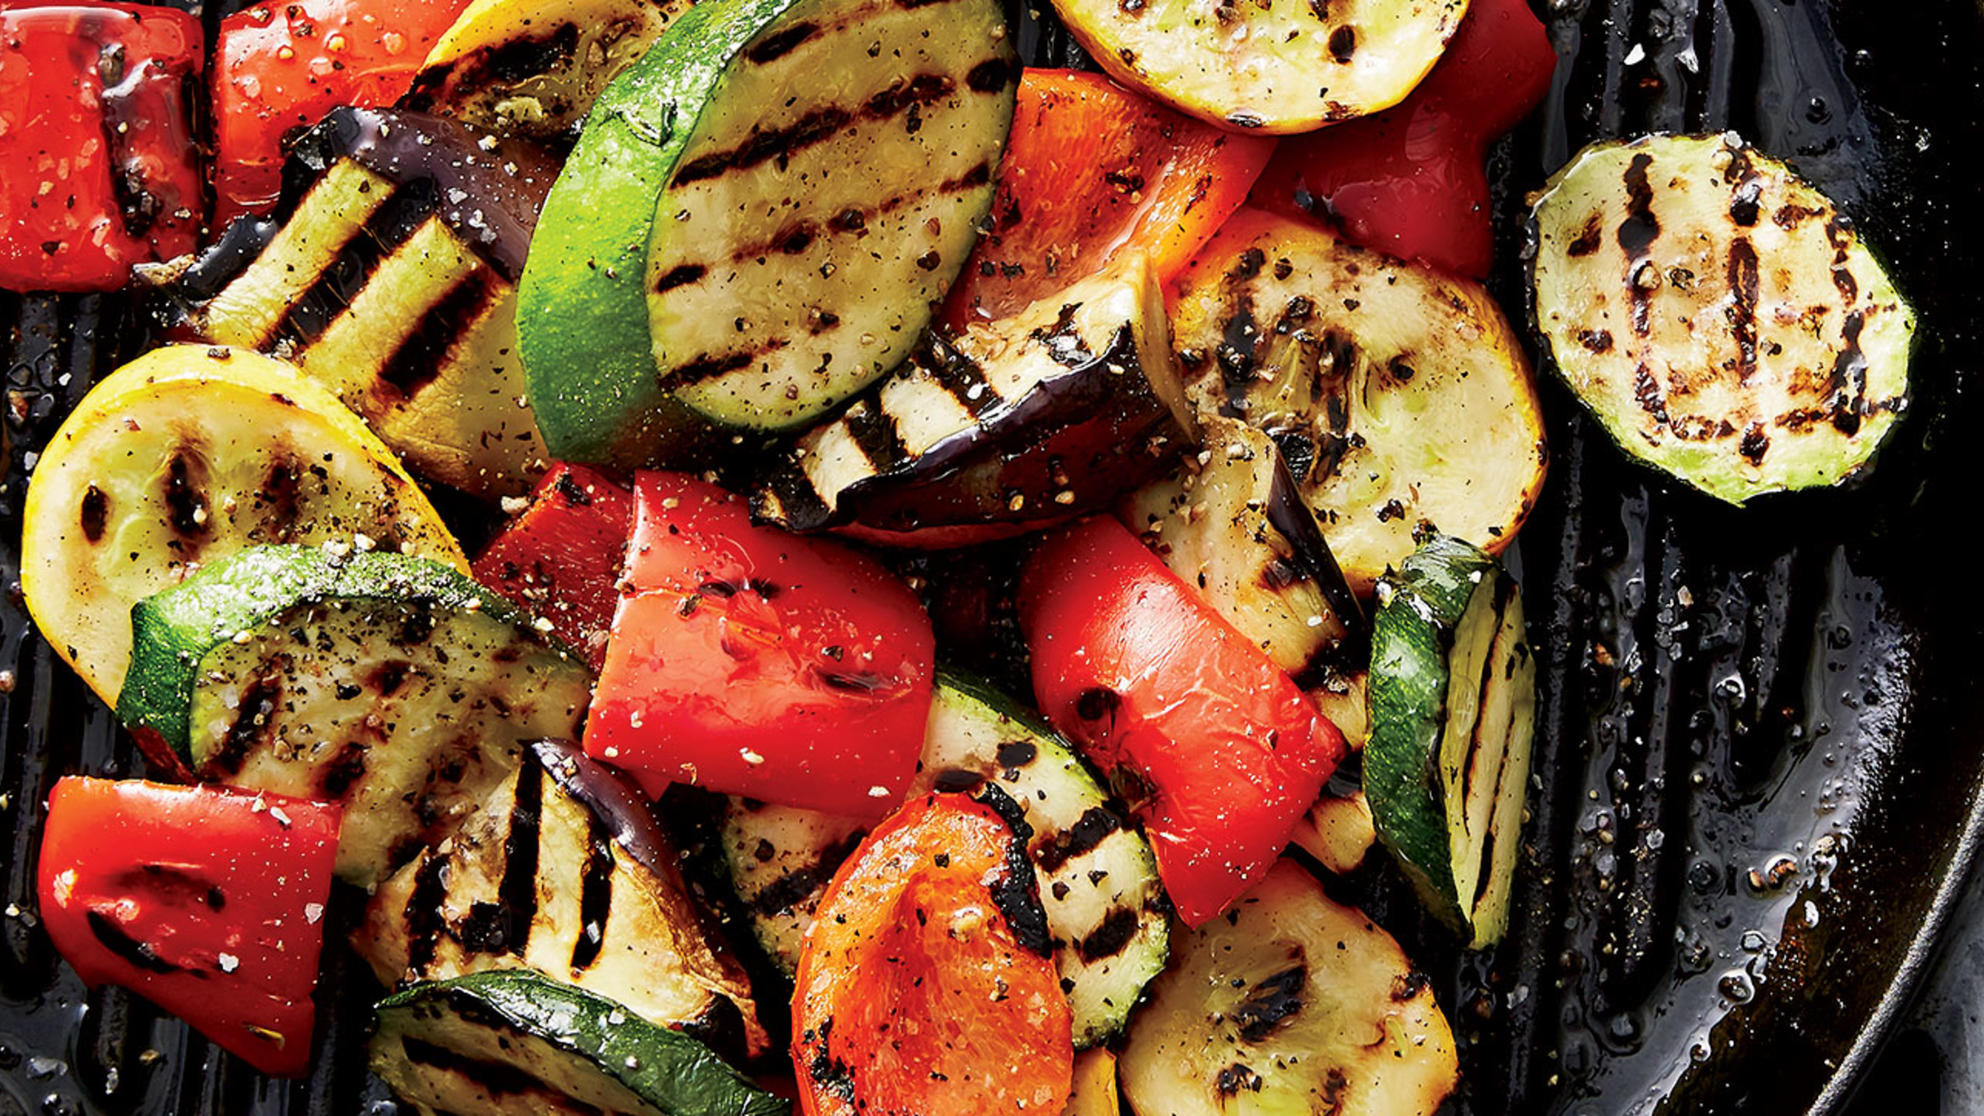 Grilled Vegetables With Creamy Turmeric Sauce Recipe - Health